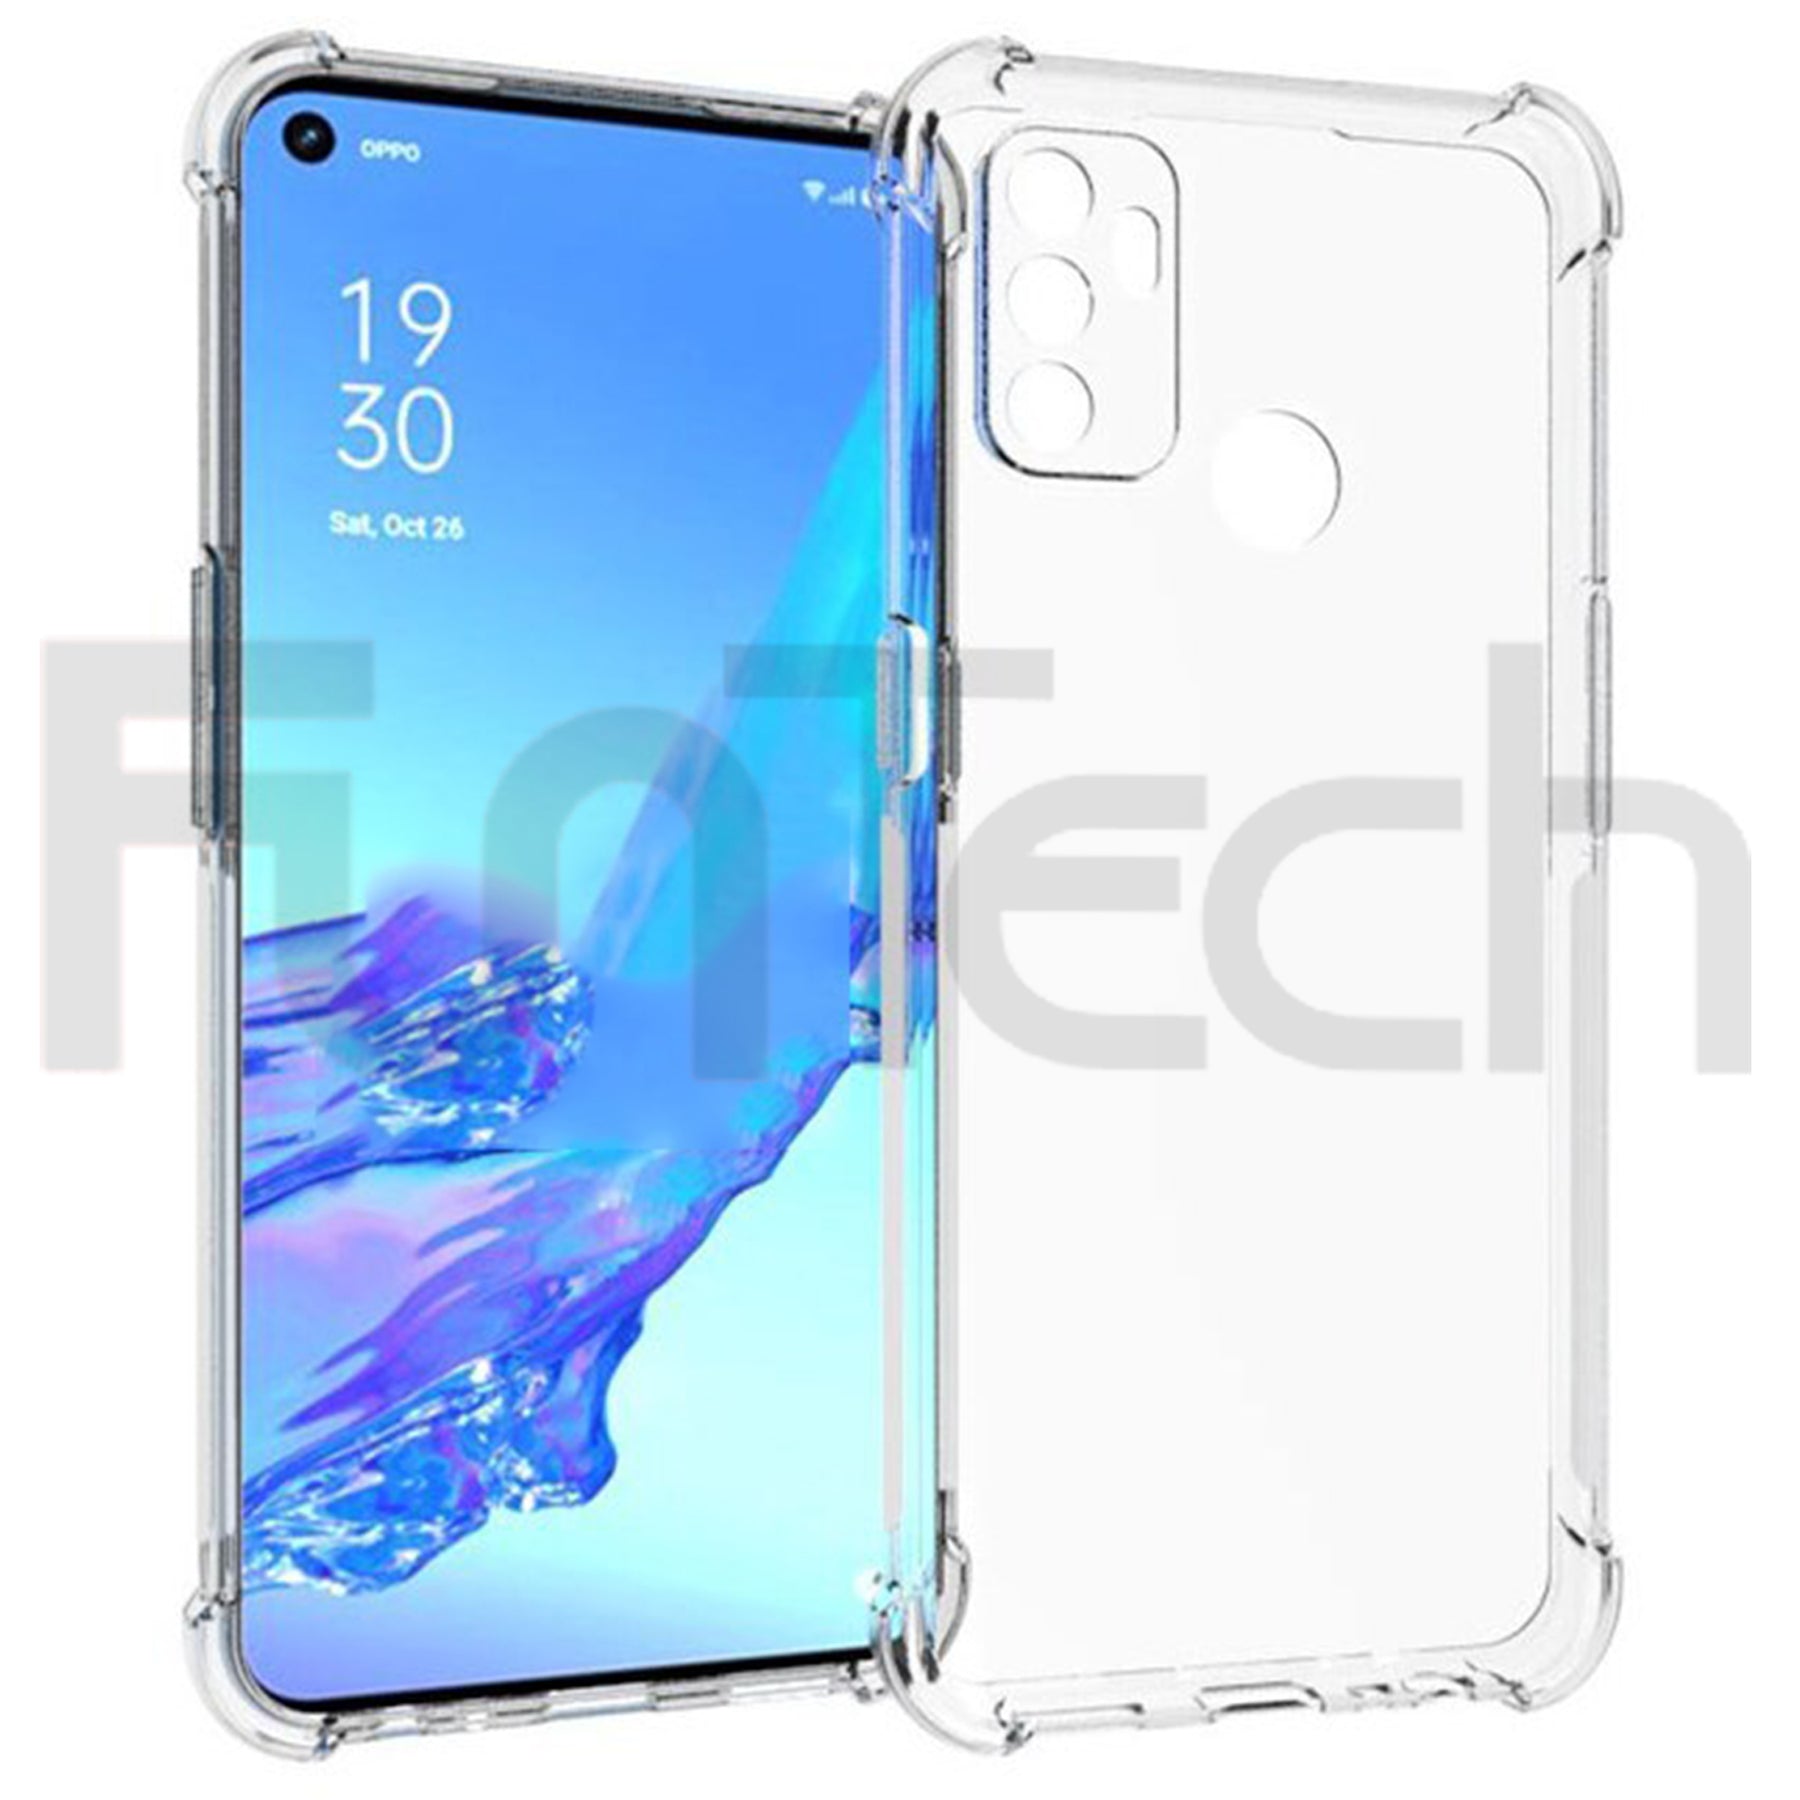  Oppo A53/A32/A33 Gel Back Case, Color Clear.